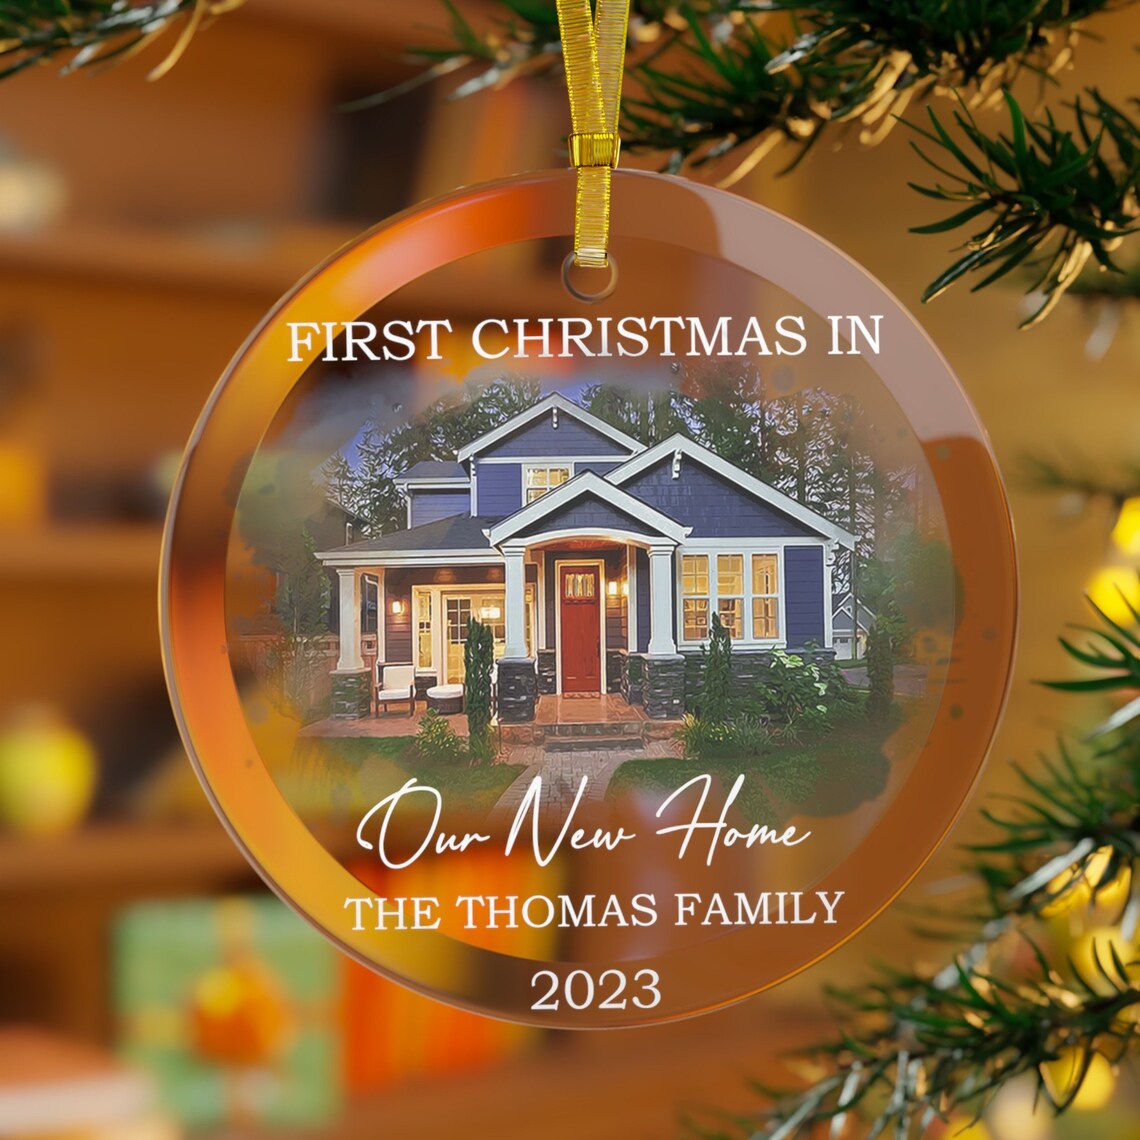 Baby’s First Christmas Glass Ornament, Photo Ornament, Custom Christmas Ornament 2023, 1st Christmas Gift, Personalized Ornament, Baby Gift (Copy)